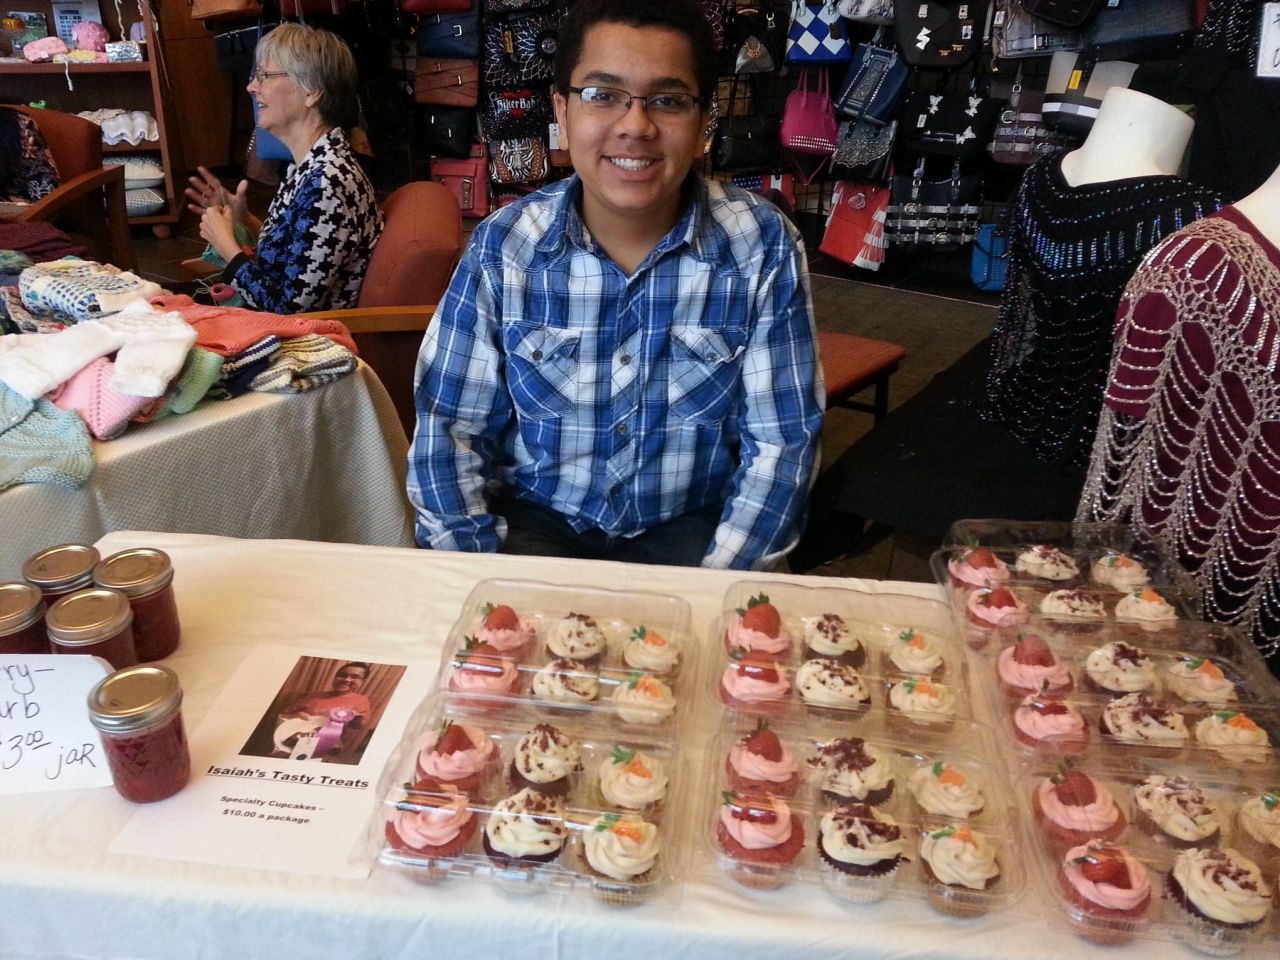 Isaiah Tuckett, 14, financed a family trip to Orlando by selling his cupcakes.